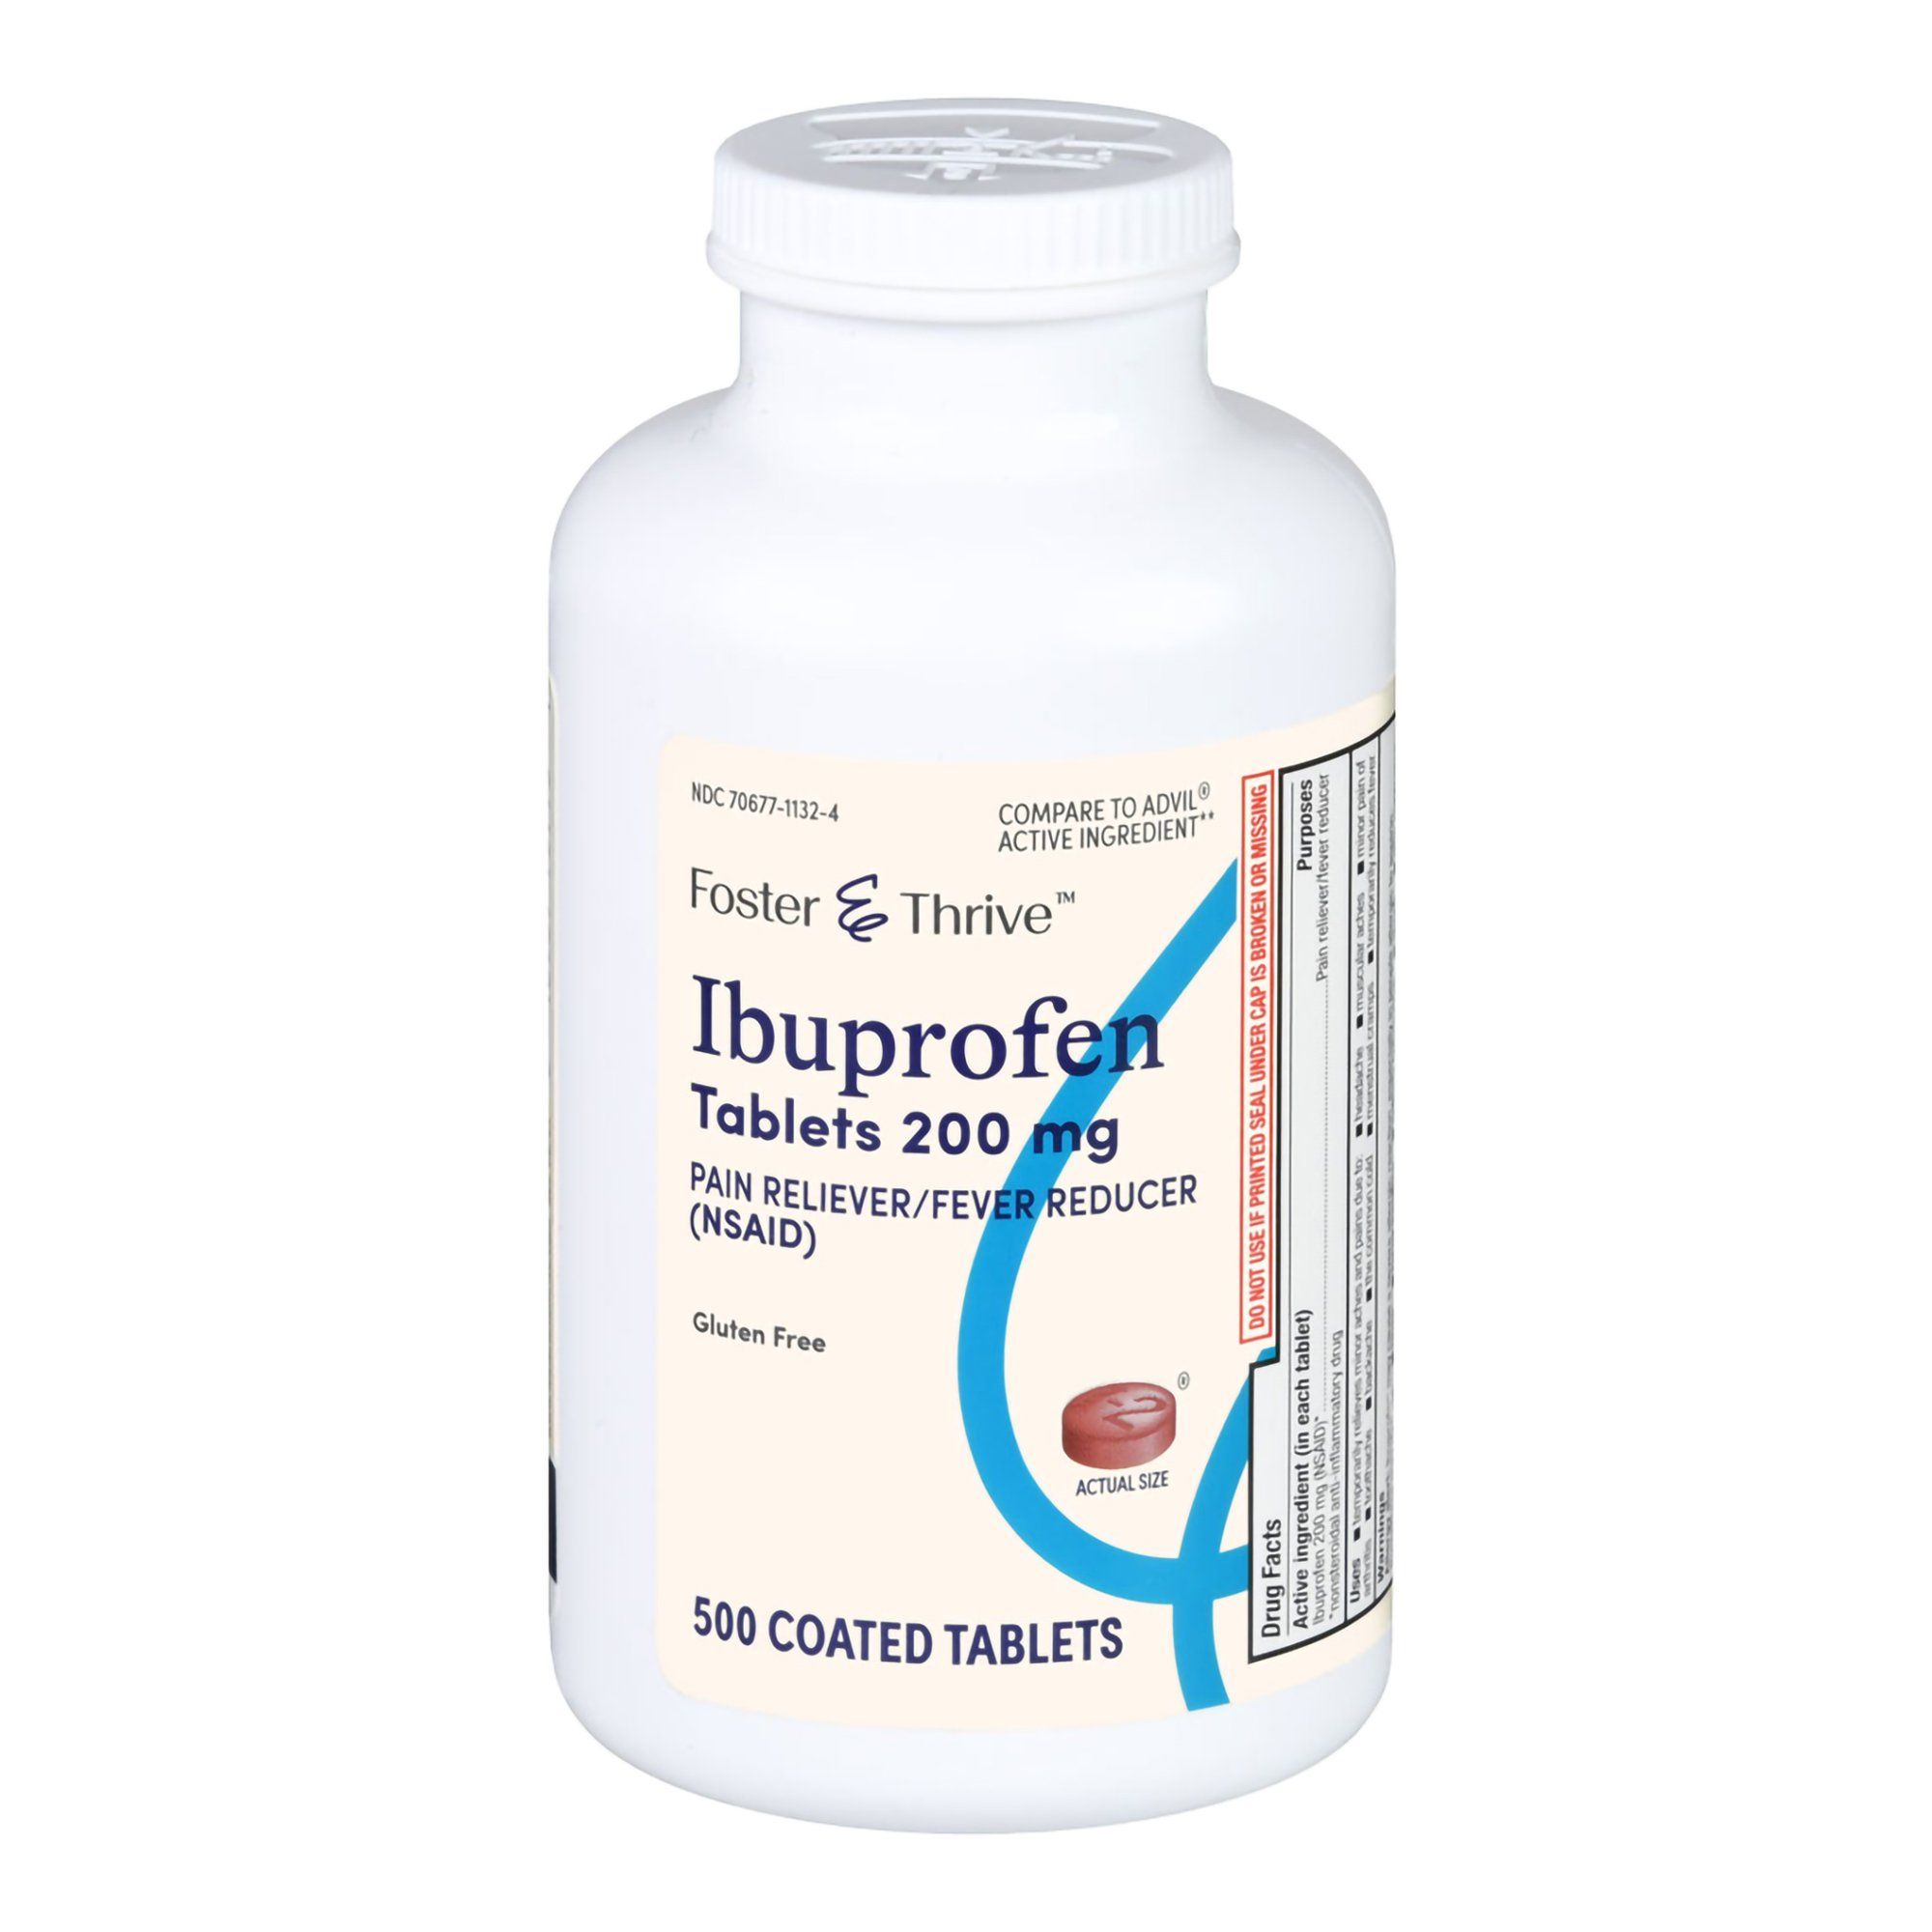 Foster & Thrive Ibuprofen Coated Tablets, 200 mg - 500 ct